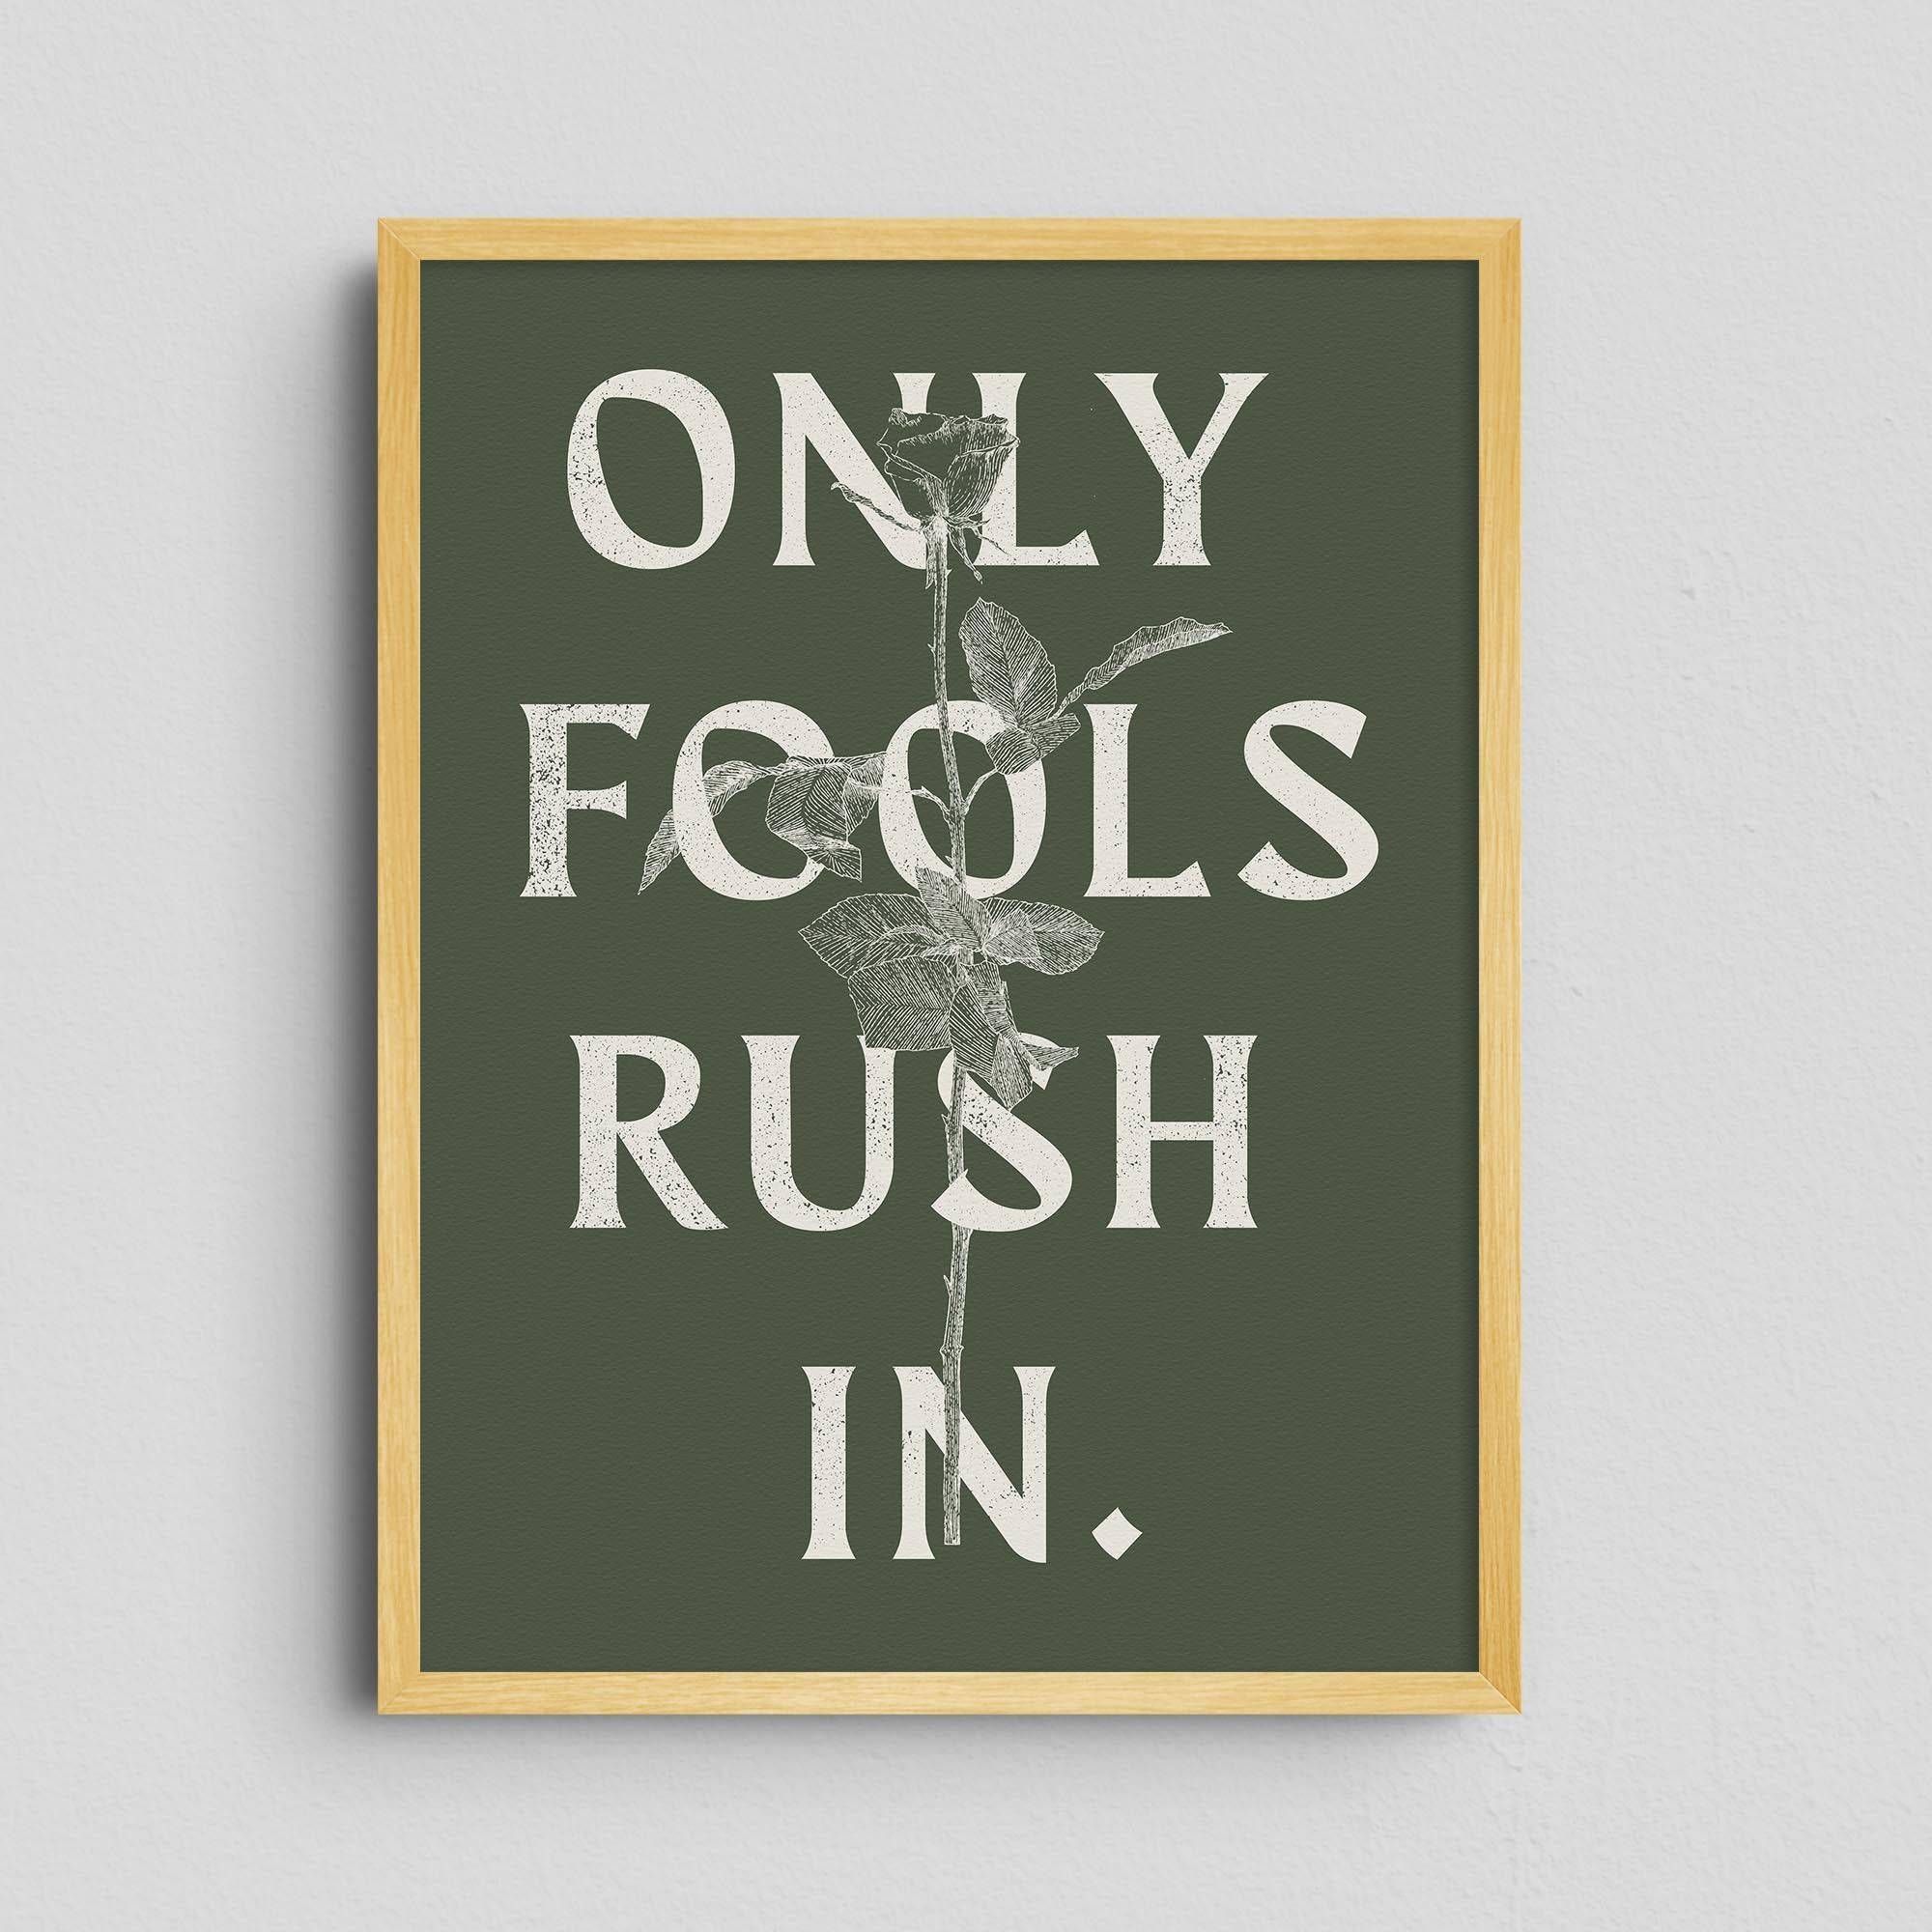 Only Fools Rush In - Olive Green - Diogo Lopes